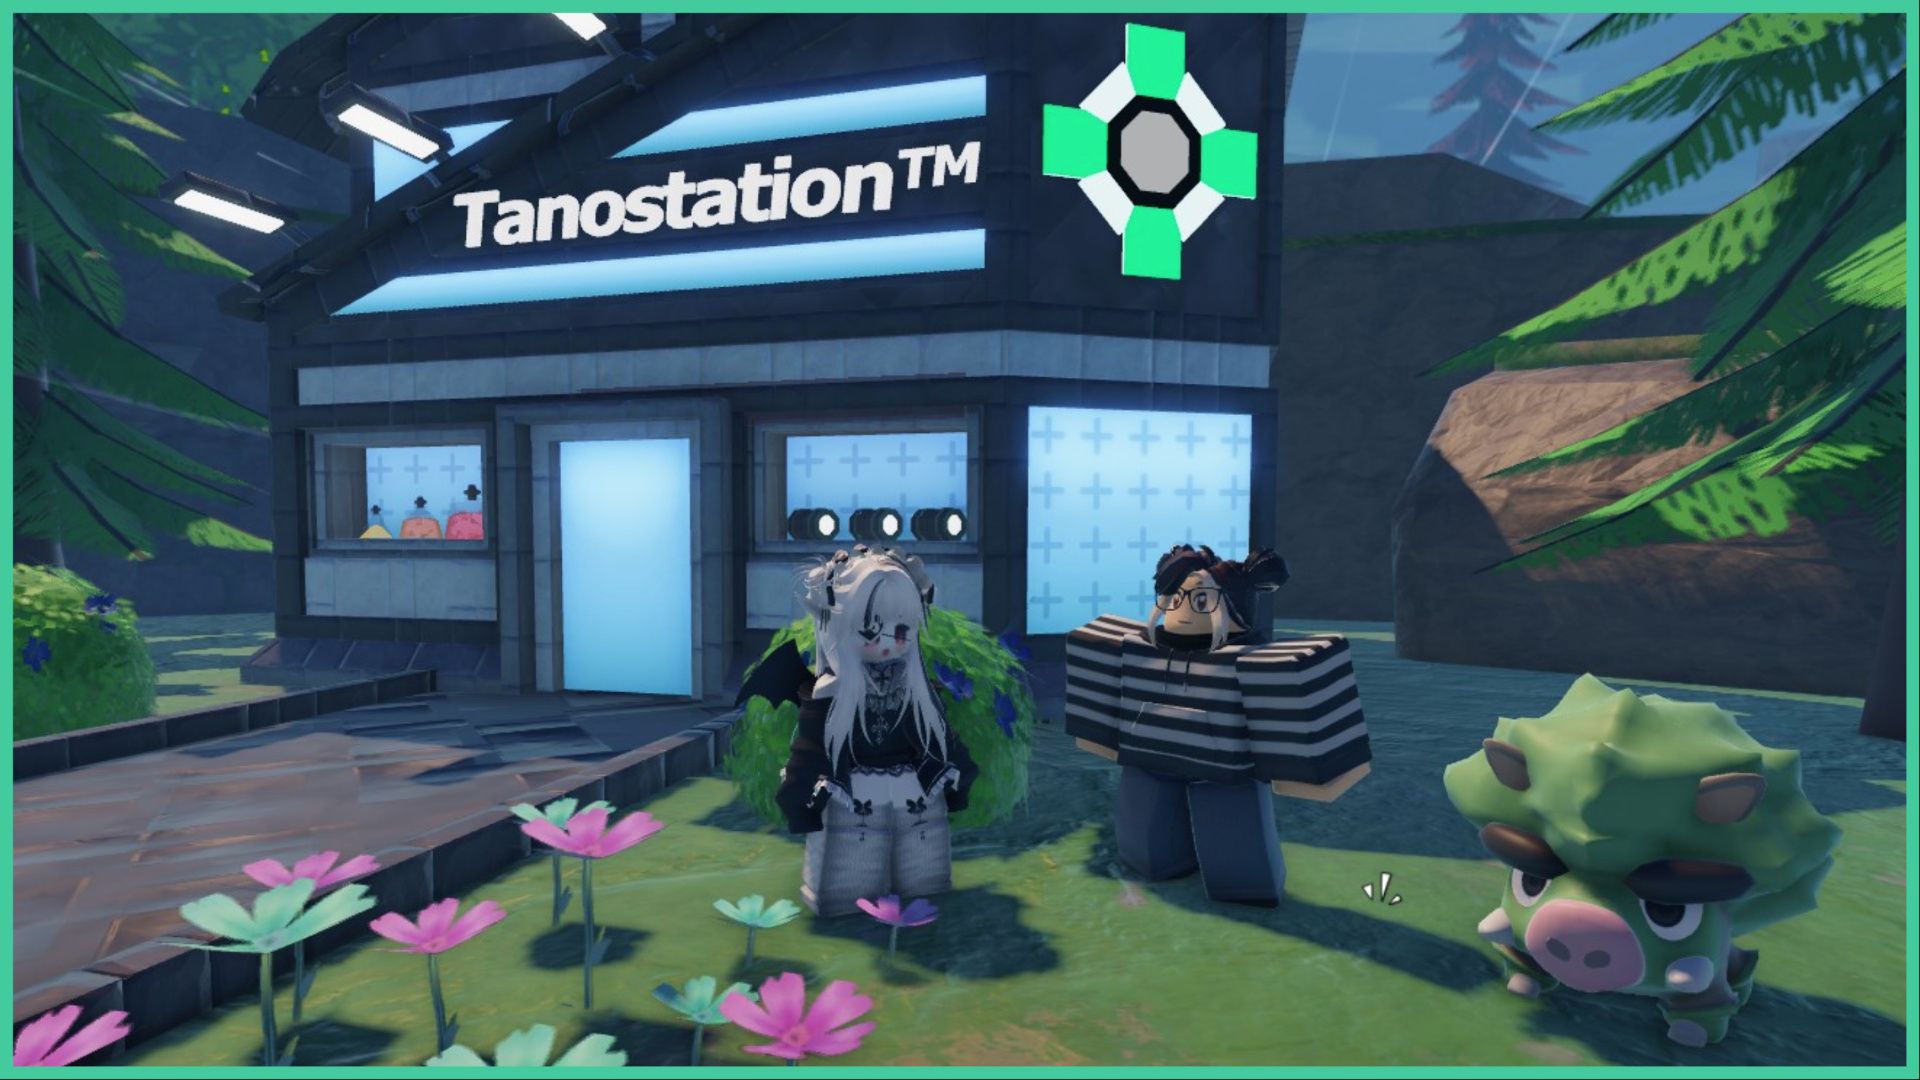 feature image for our tales of tanorio codes guide, the image features a screenshot of the tanostation building with a roblox player outside standing with an NPC in a stripey jumper and glasses who has a bjorkchomp next to her, the grass has some flowers and the stone pathway leading to the tanostation is framed by two trees and flowery bushes